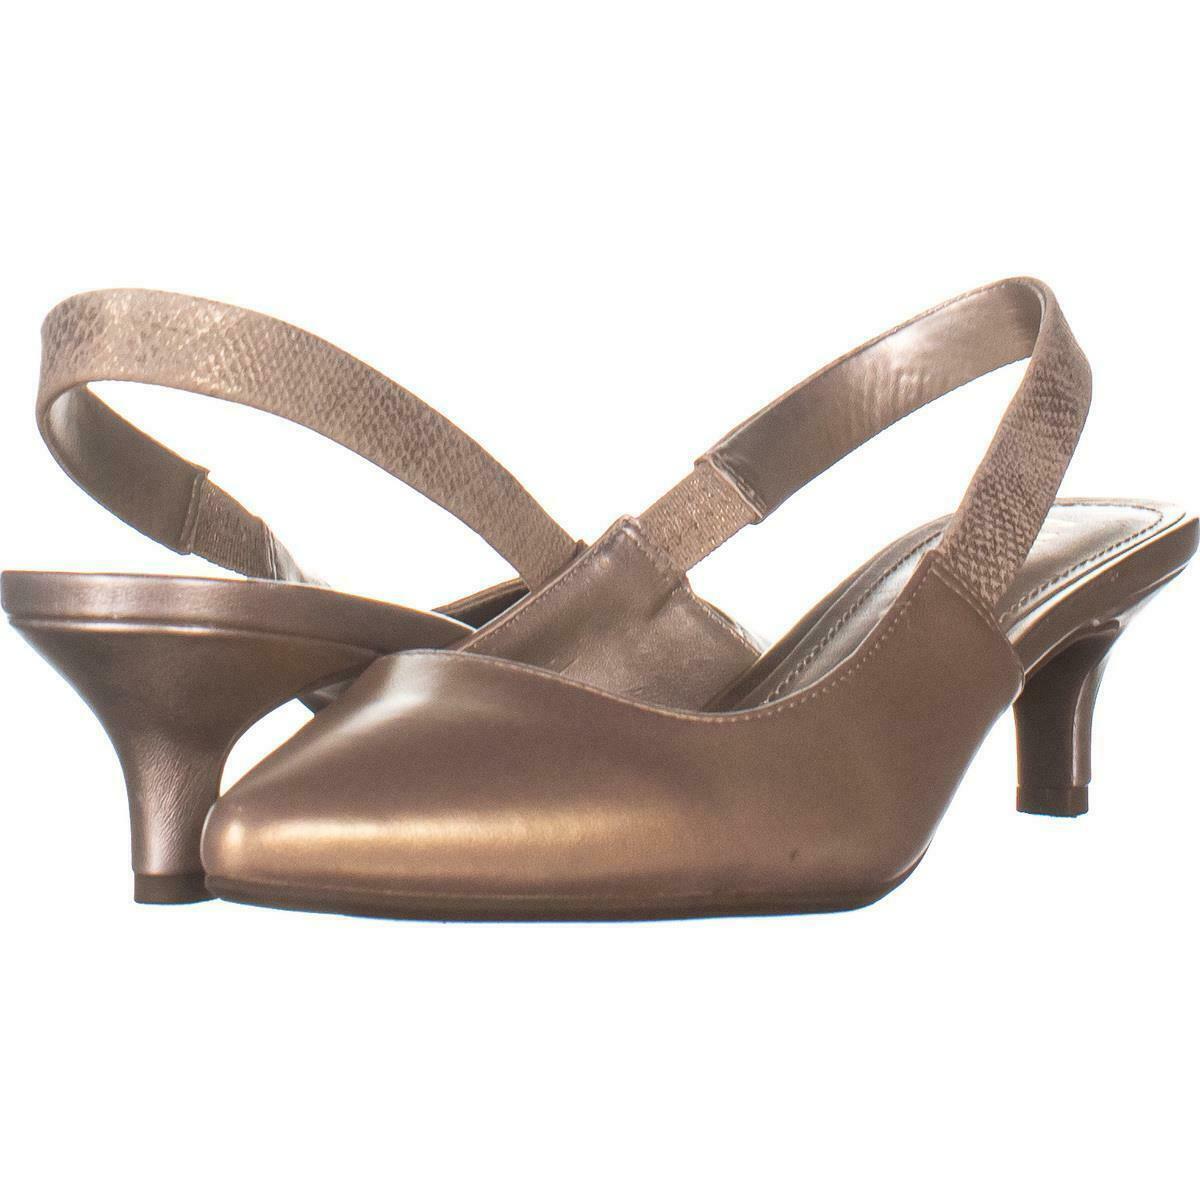 Anne Klein Aileen Slingback Pumps 854, Natural Leather, 6.5 US - Heels